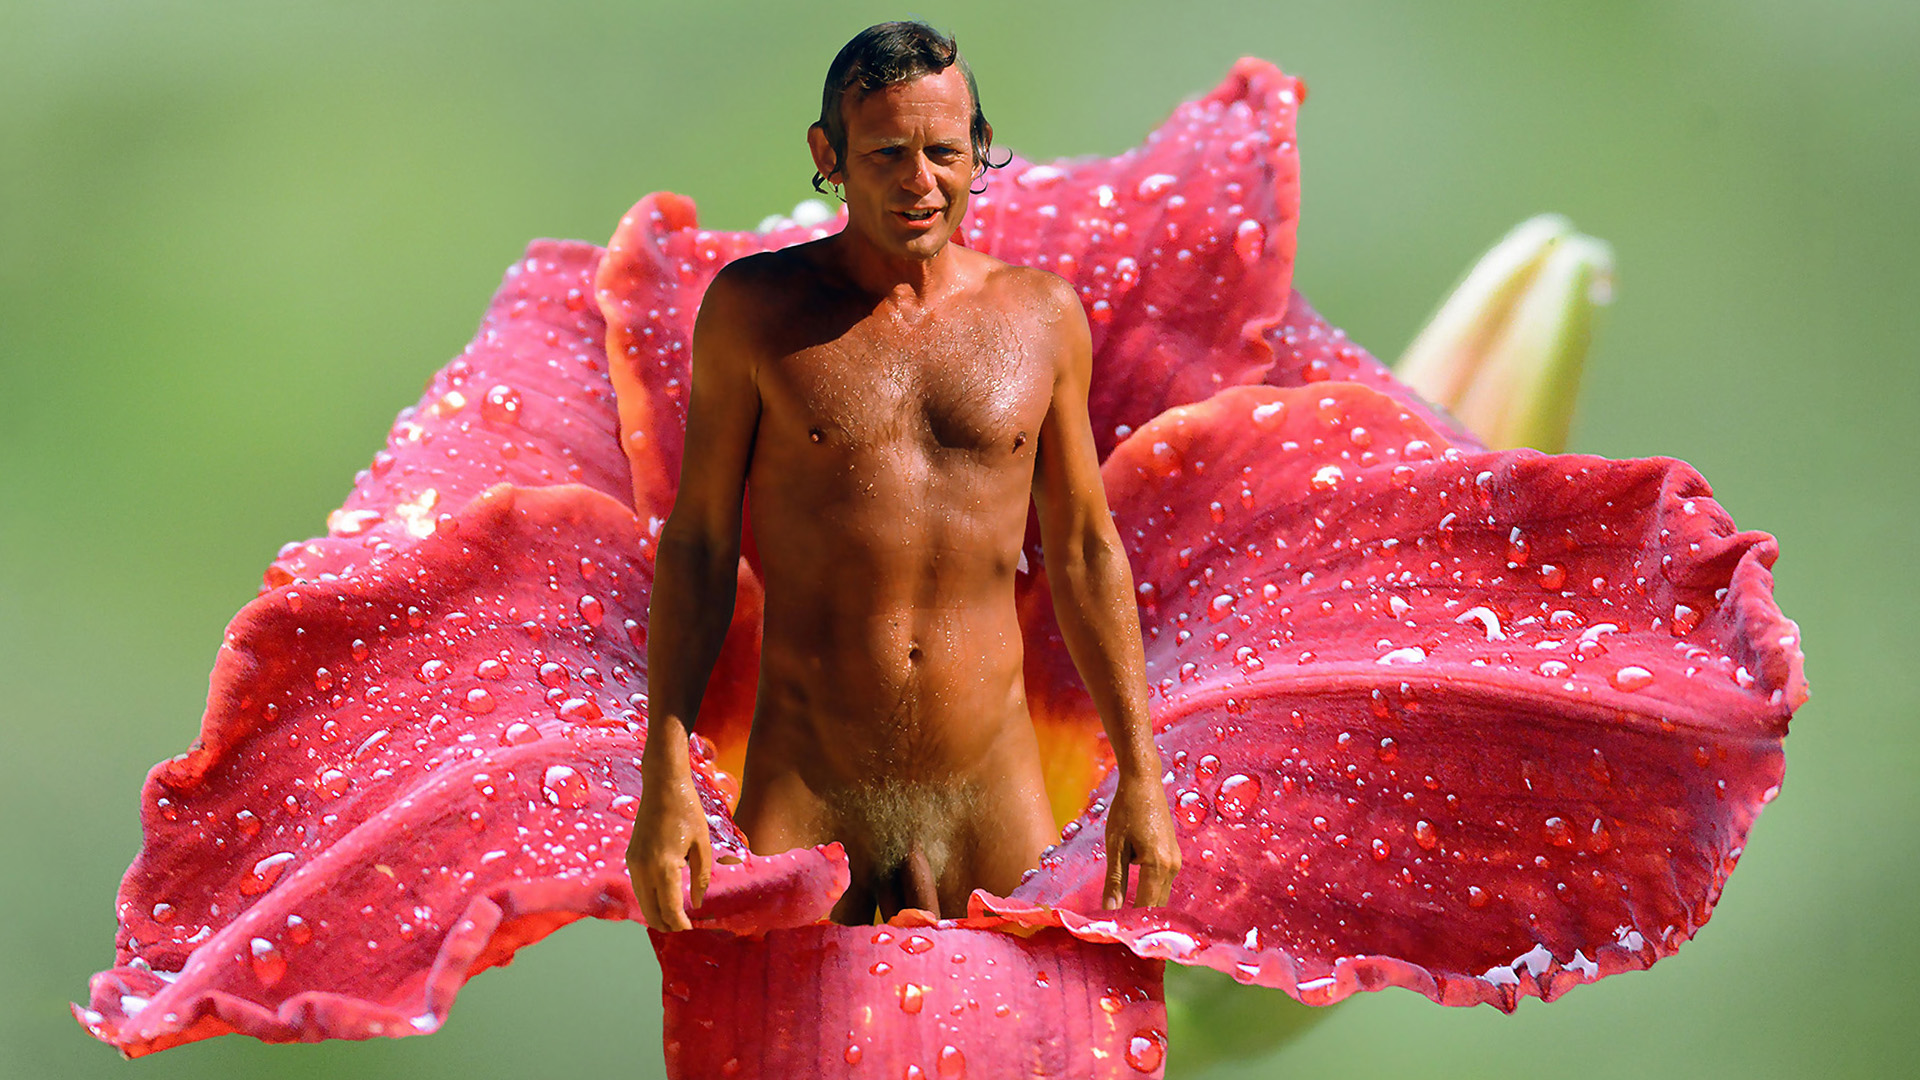 Collage - Nudism and nature - naked man in the bosom of a daylily